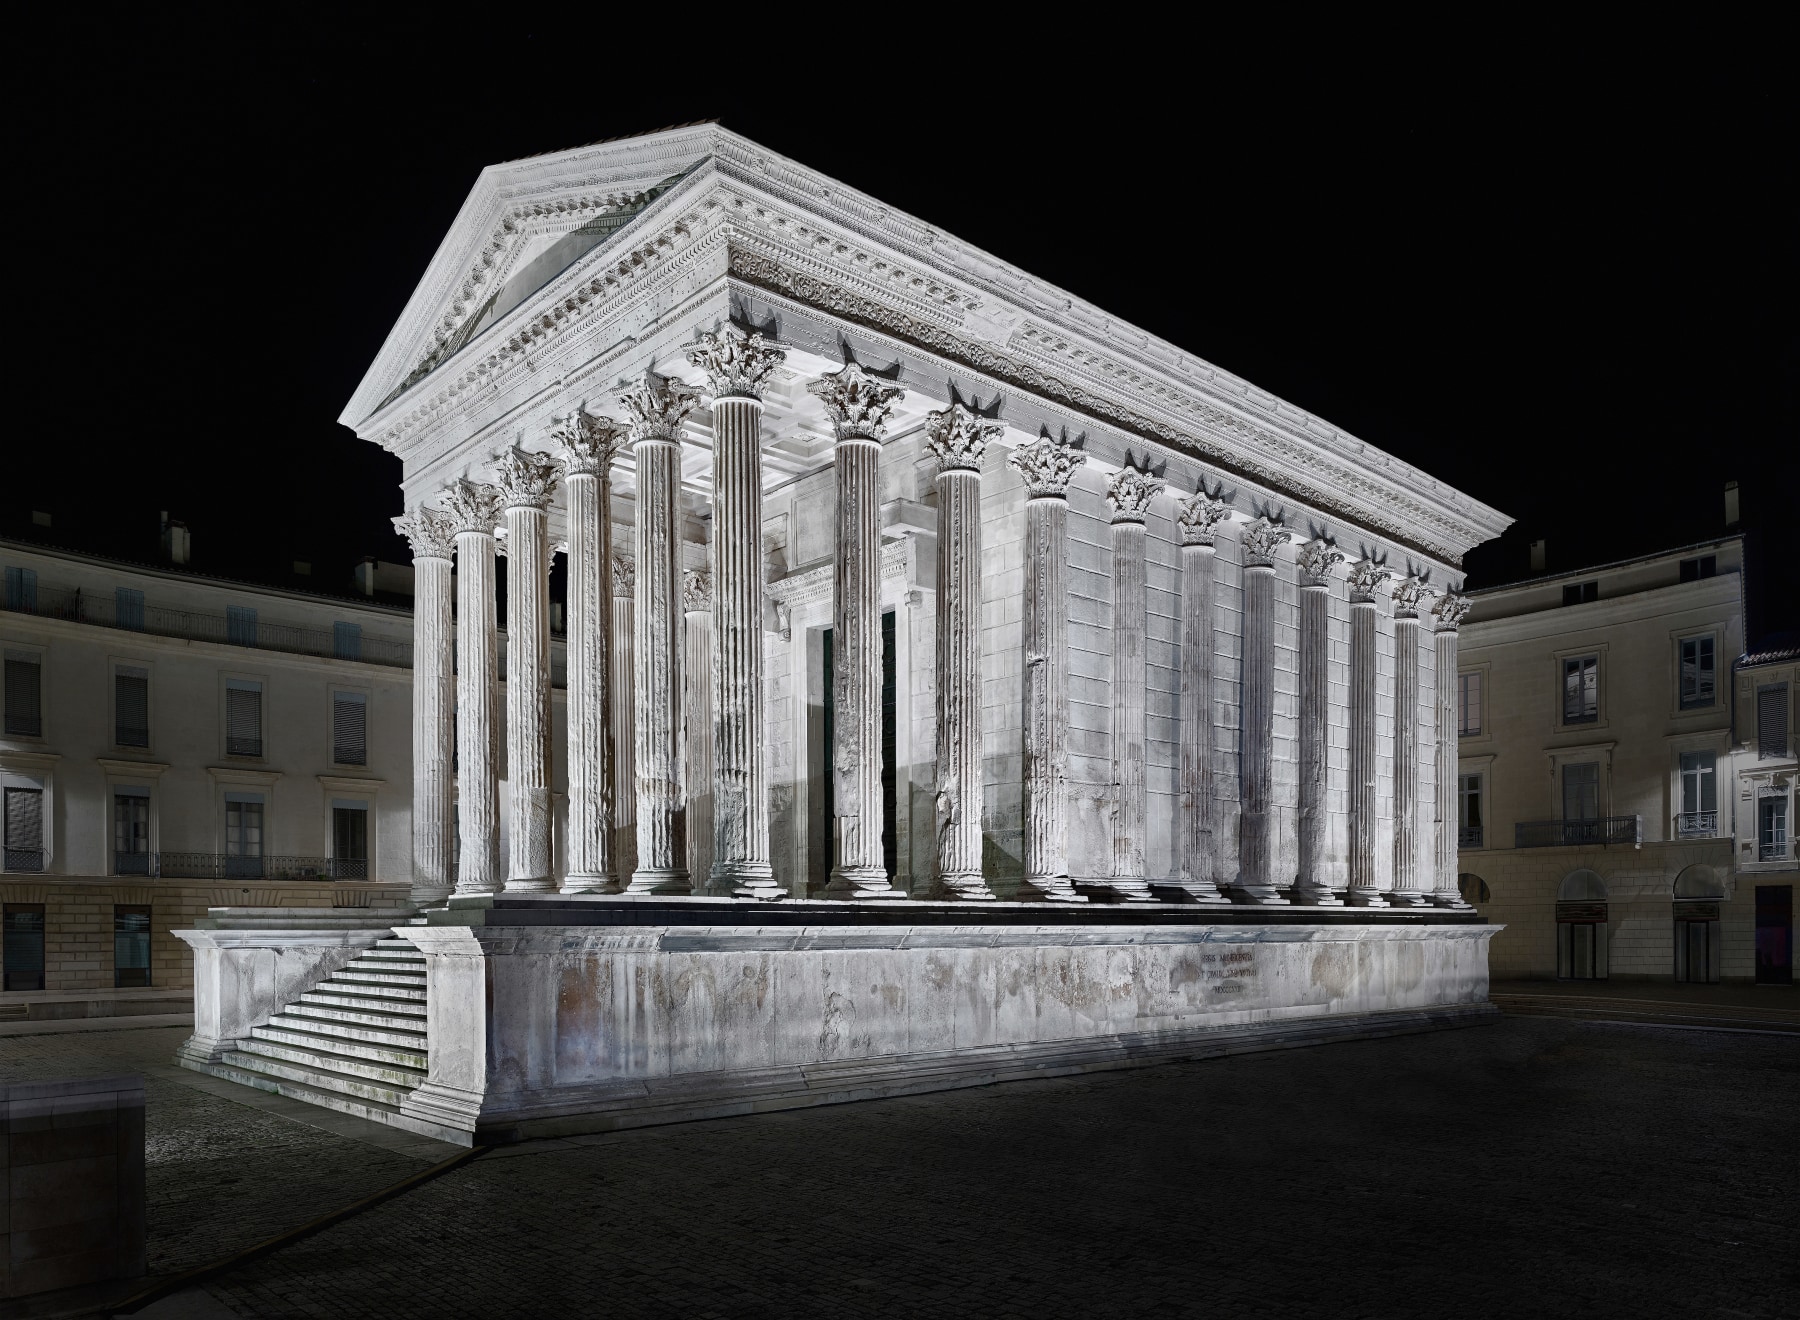 Nighttime photo of a dramatically lit classical Greco Roman building in Nimes, France.